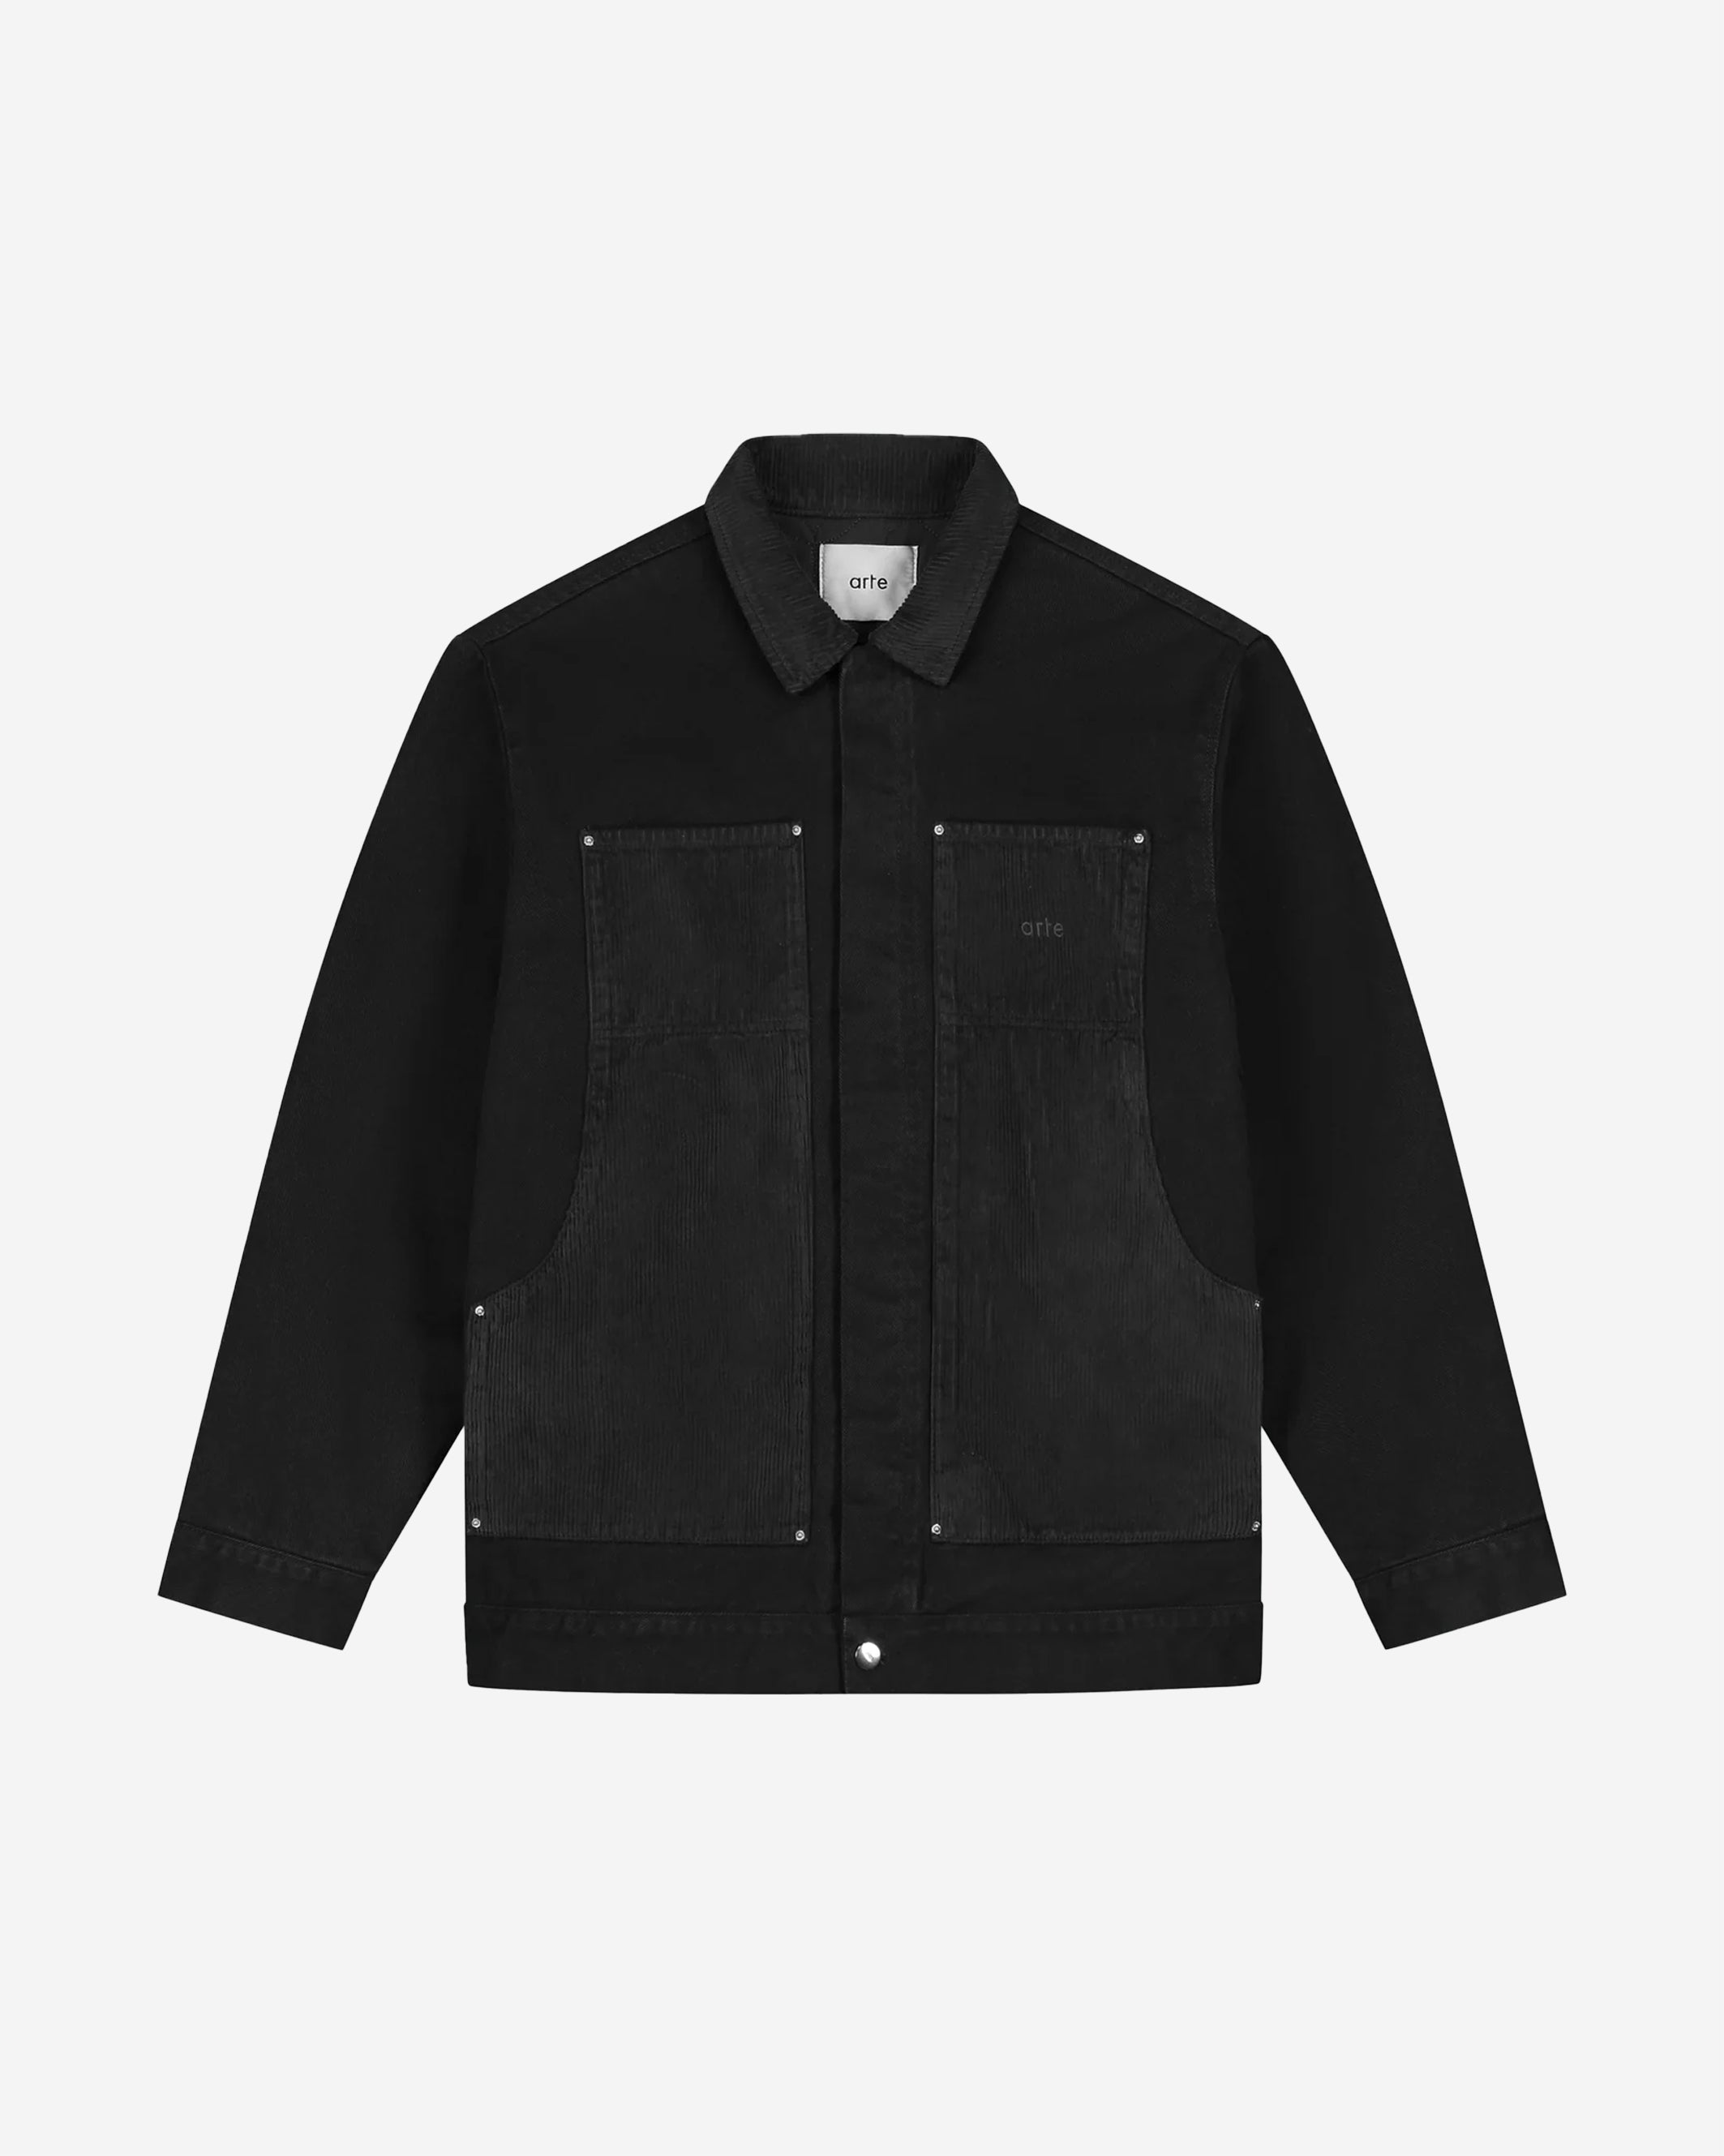 The Jules Workwear Jacket is Arte's take on a classic workwear-style jacket in all black. Its utilitarian aesthetic is defined by its front paneling reminiscent of traditional work jackets. The front panel comes in a tonal corduroy fabric, giving the jacket a different feeling of texture. Made from premium denim, the jacket features four open pockets and full-length button closure.